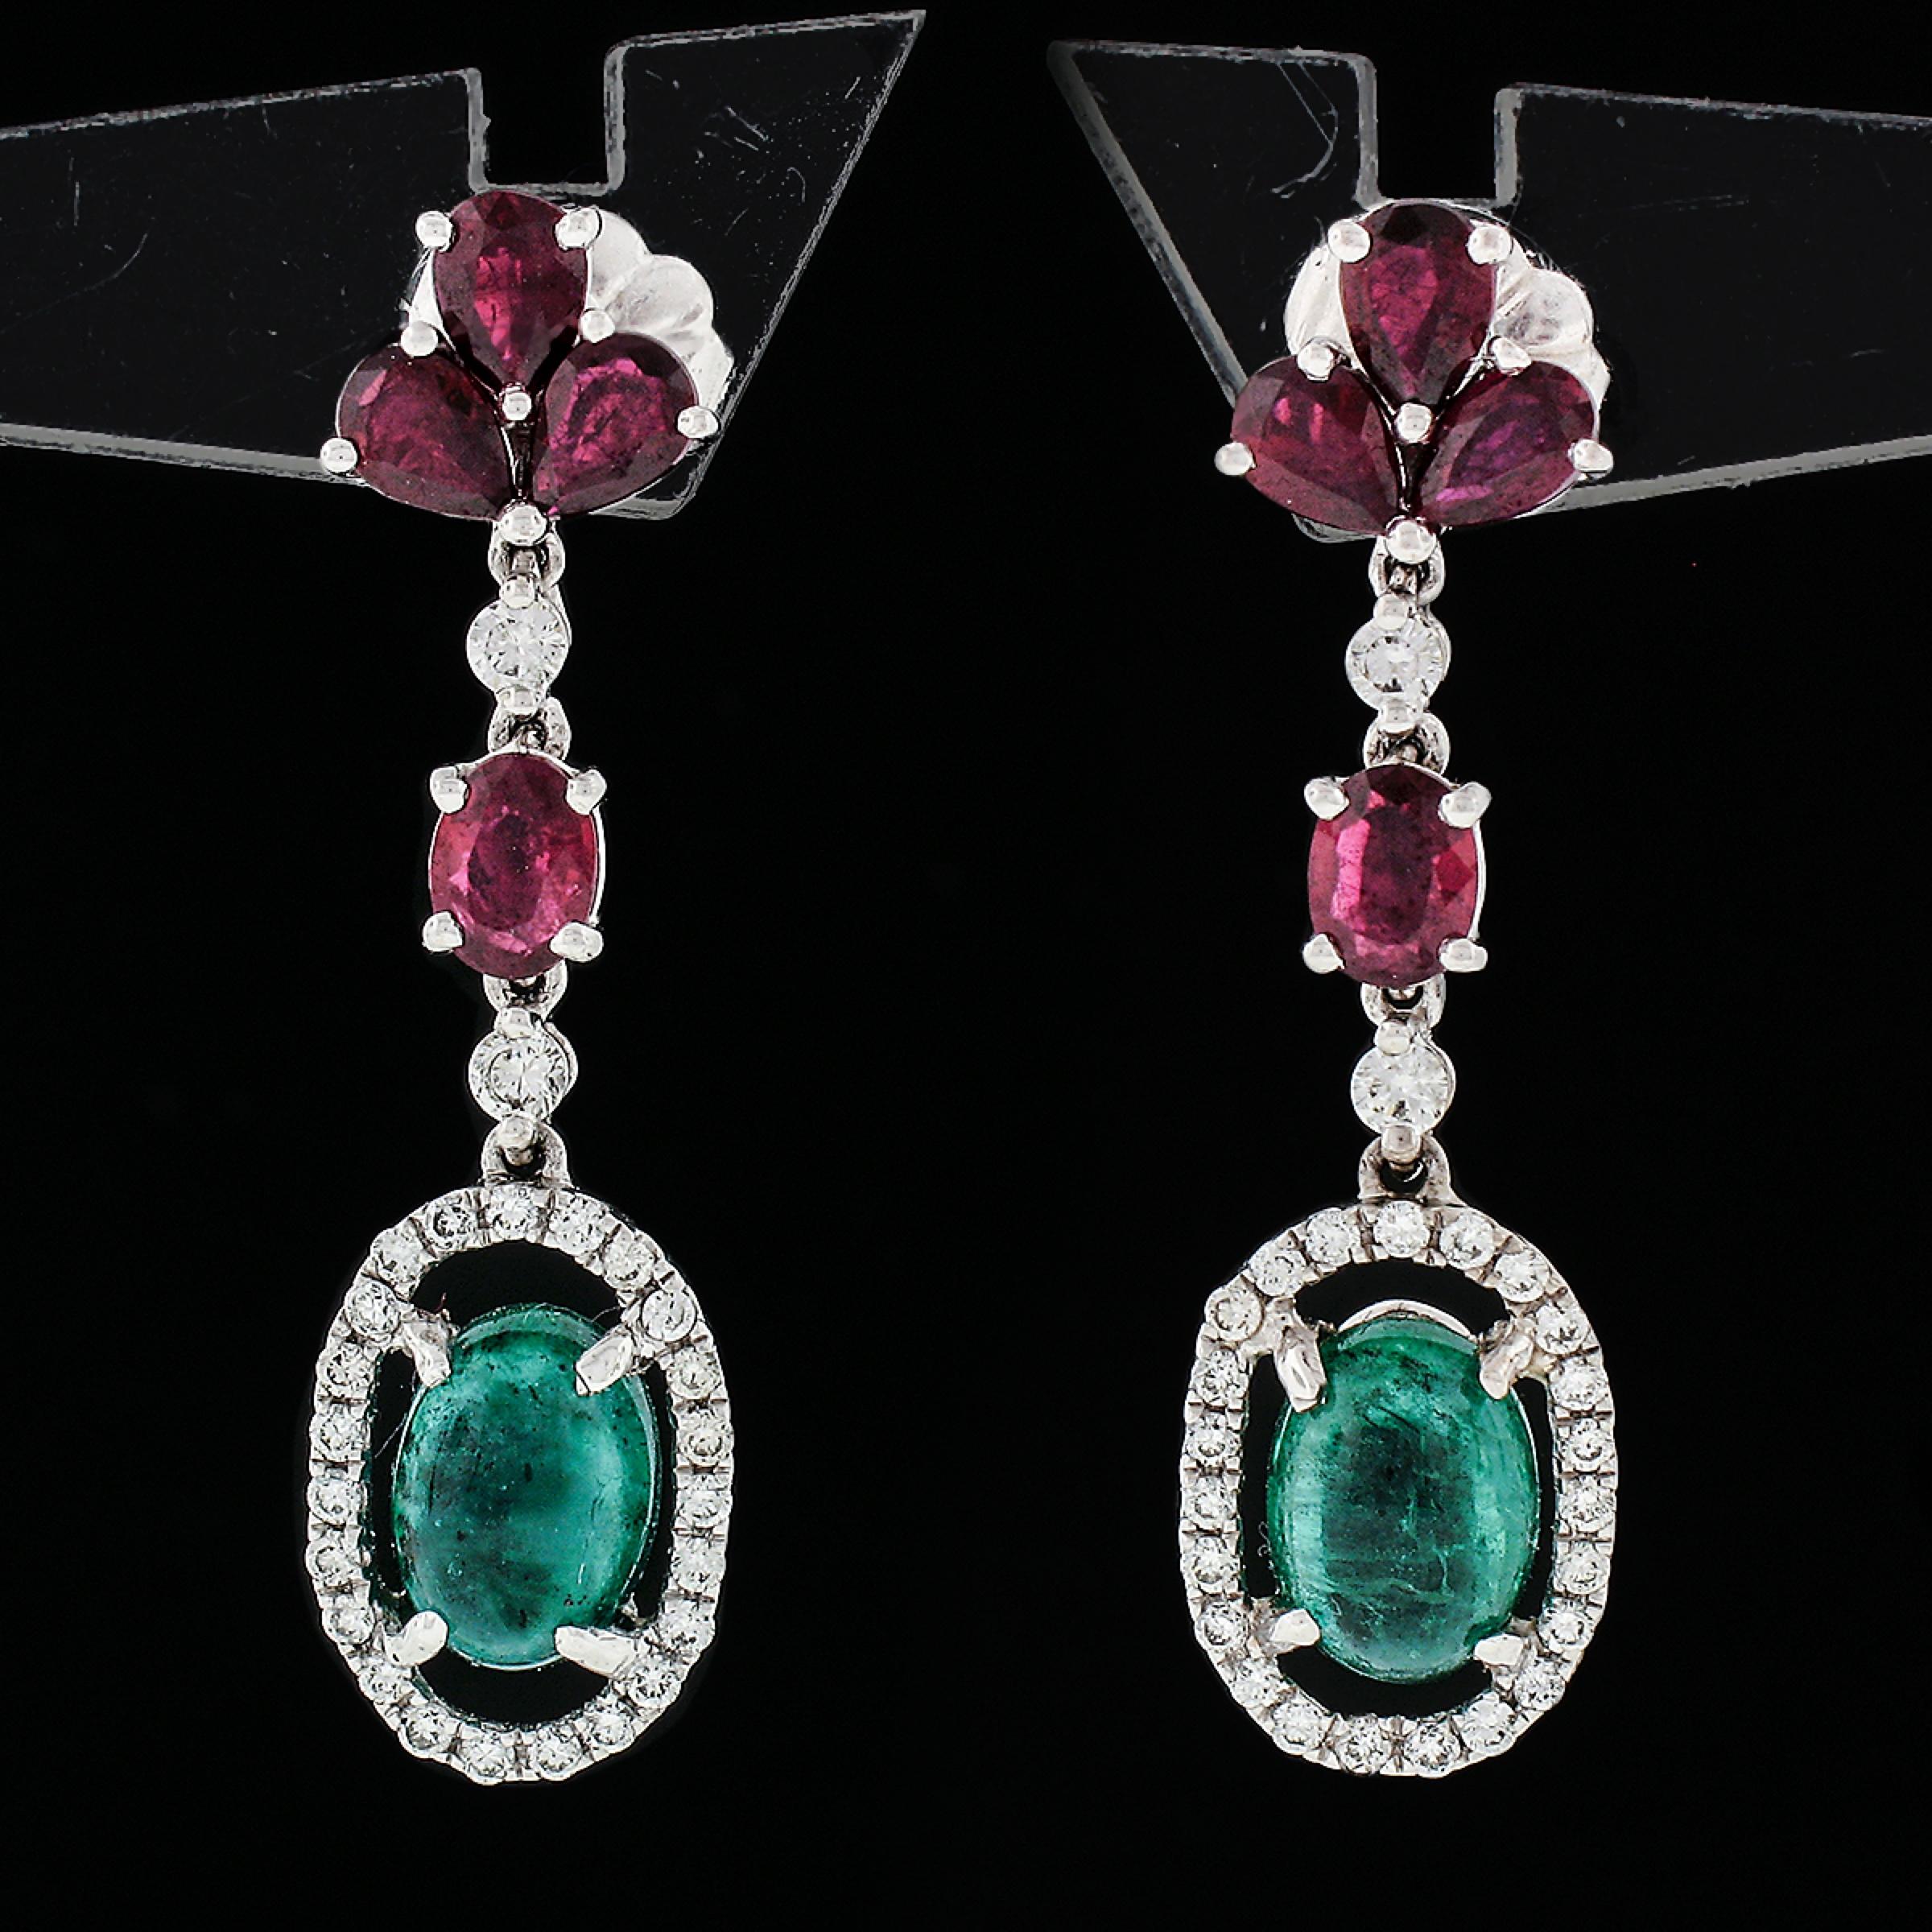 You are looking at a very elegant pair of earrings crafted in solid 18k white gold and features a unique and fancy dangle design, set with excellent quality stones throughout. Each earring consists of a halo design that carries a gorgeous oval